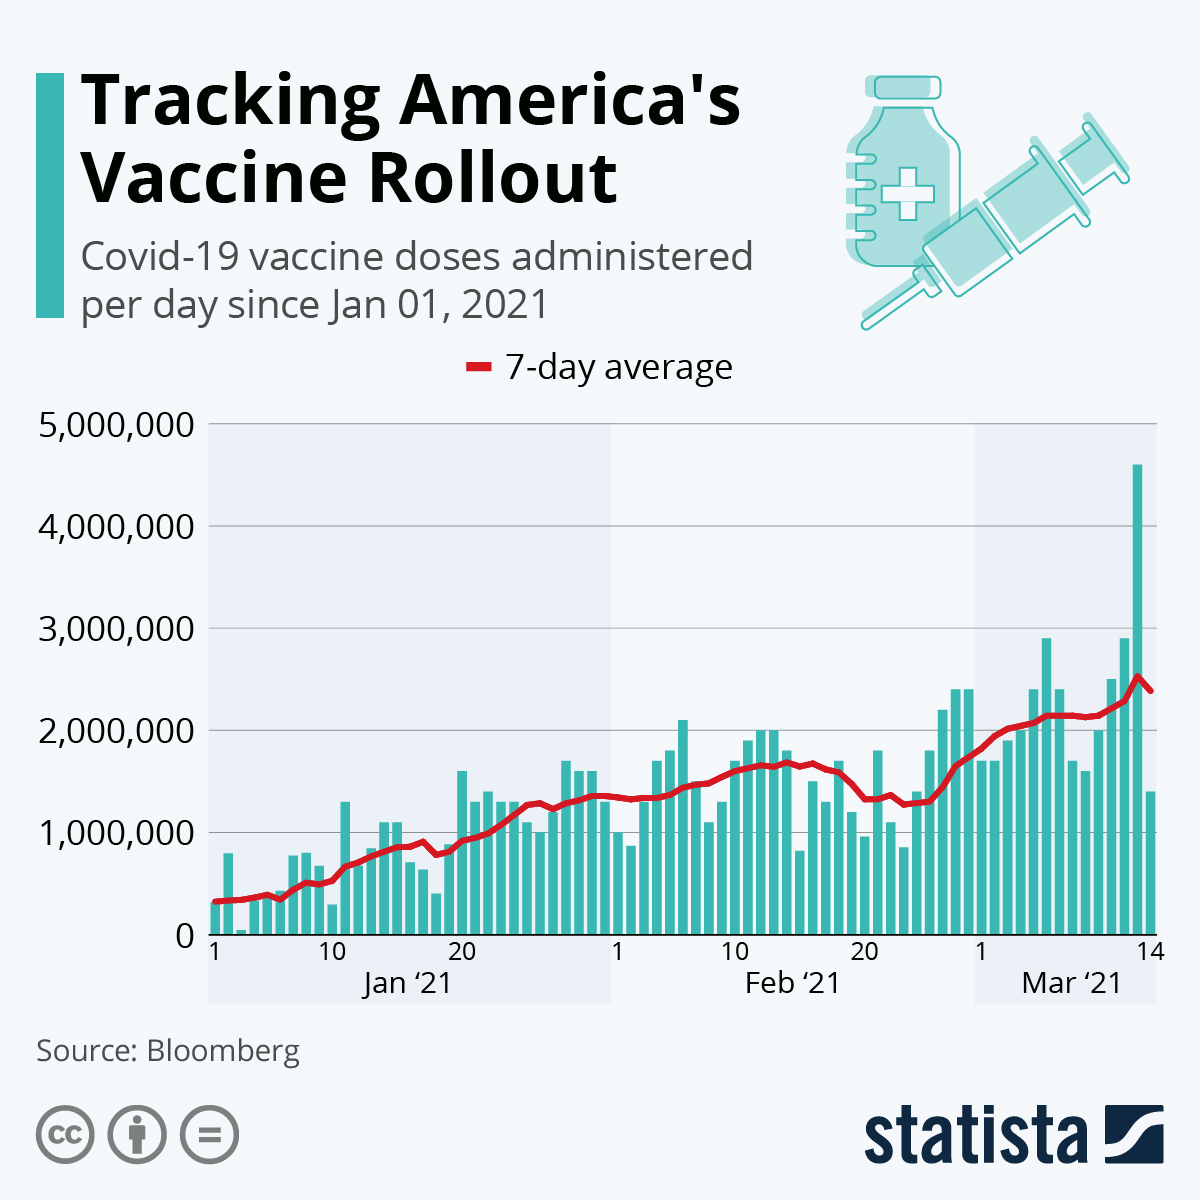 Tracking America's Vaccine Rollout